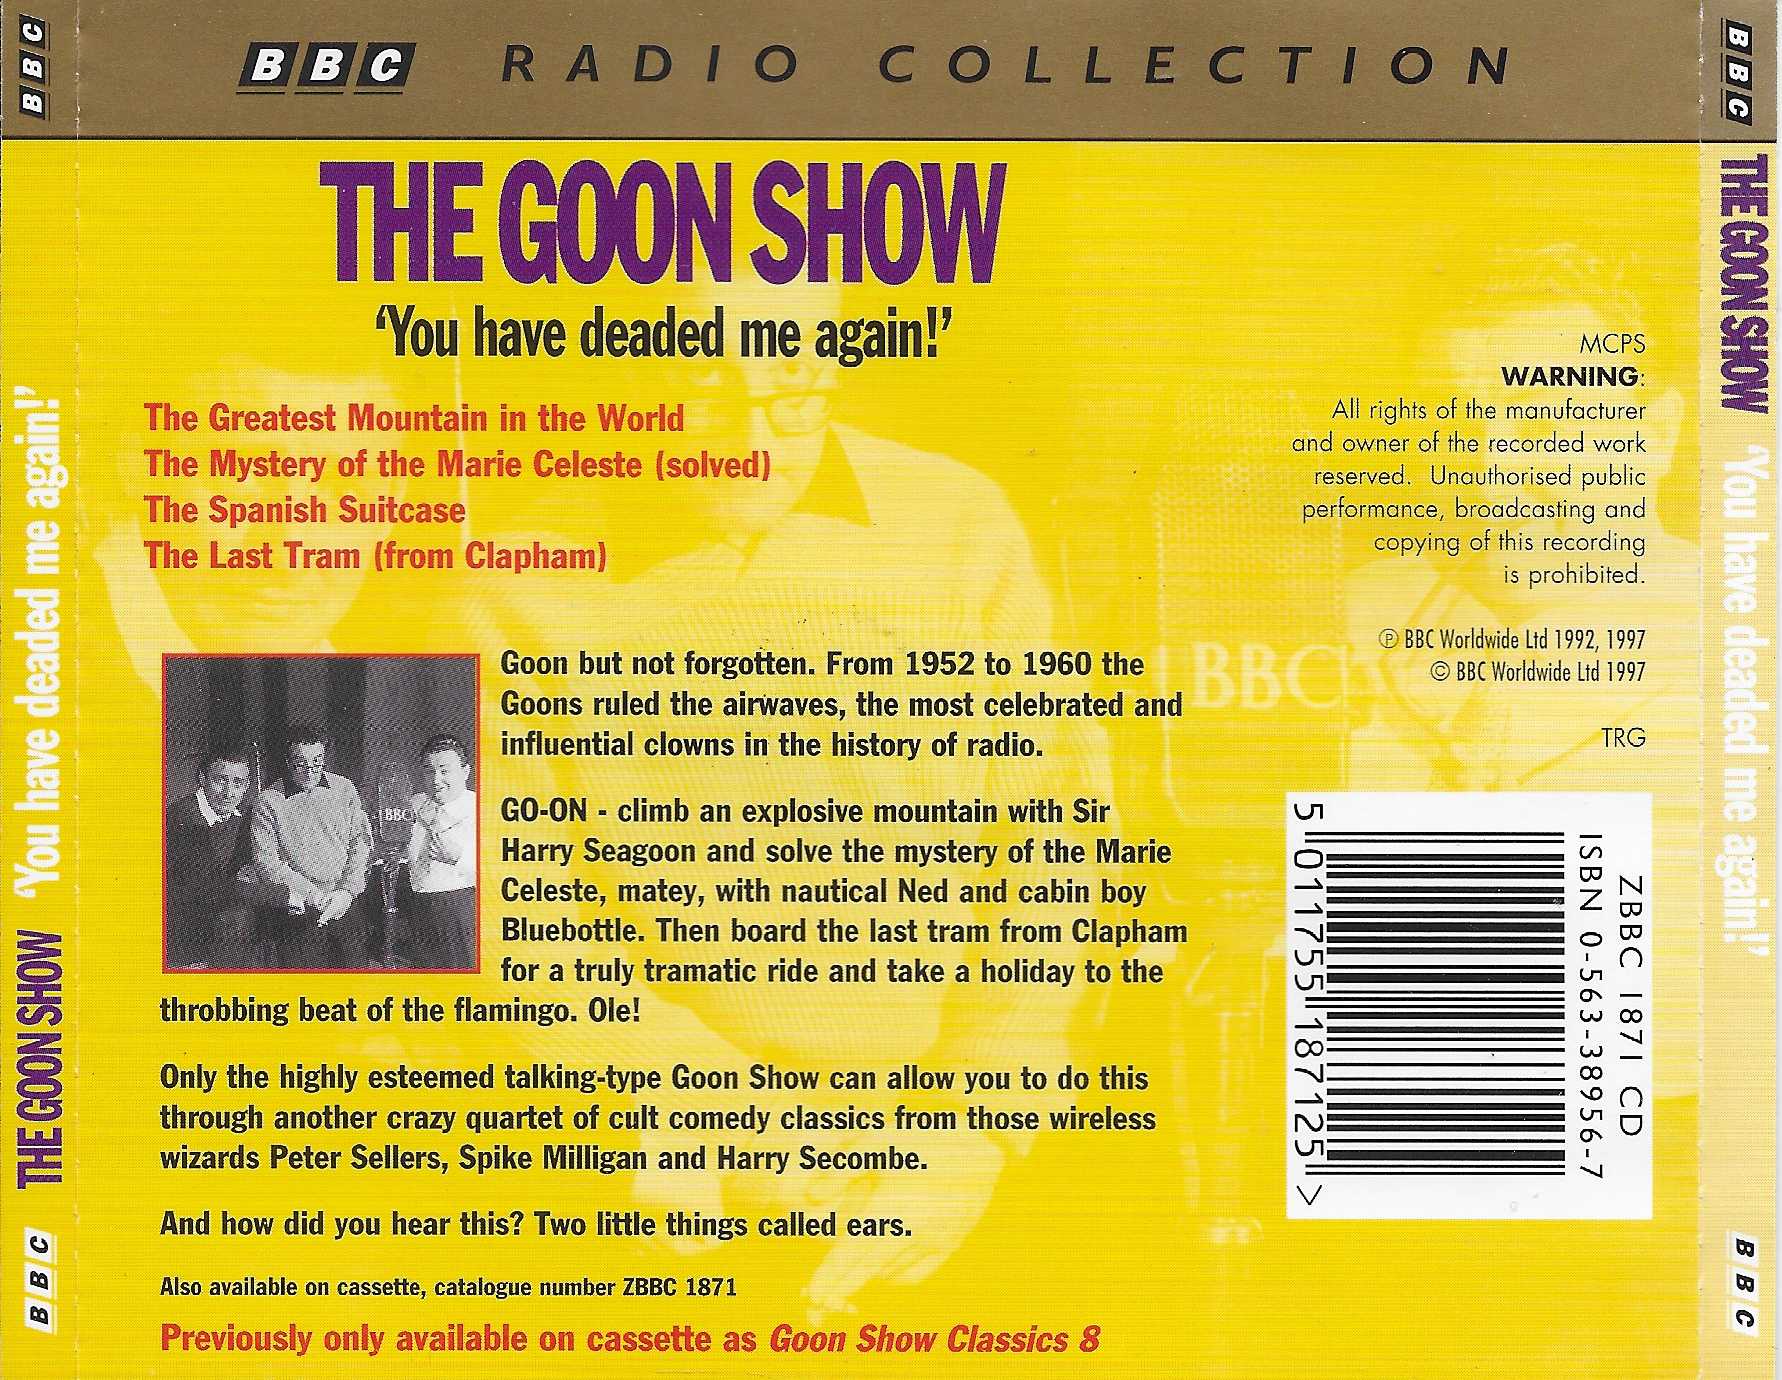 Picture of ZBBC 1871 CD The Goon Show 8 - You have deaded me again! by artist Spike Milligan / Eric Sykes from the BBC records and Tapes library